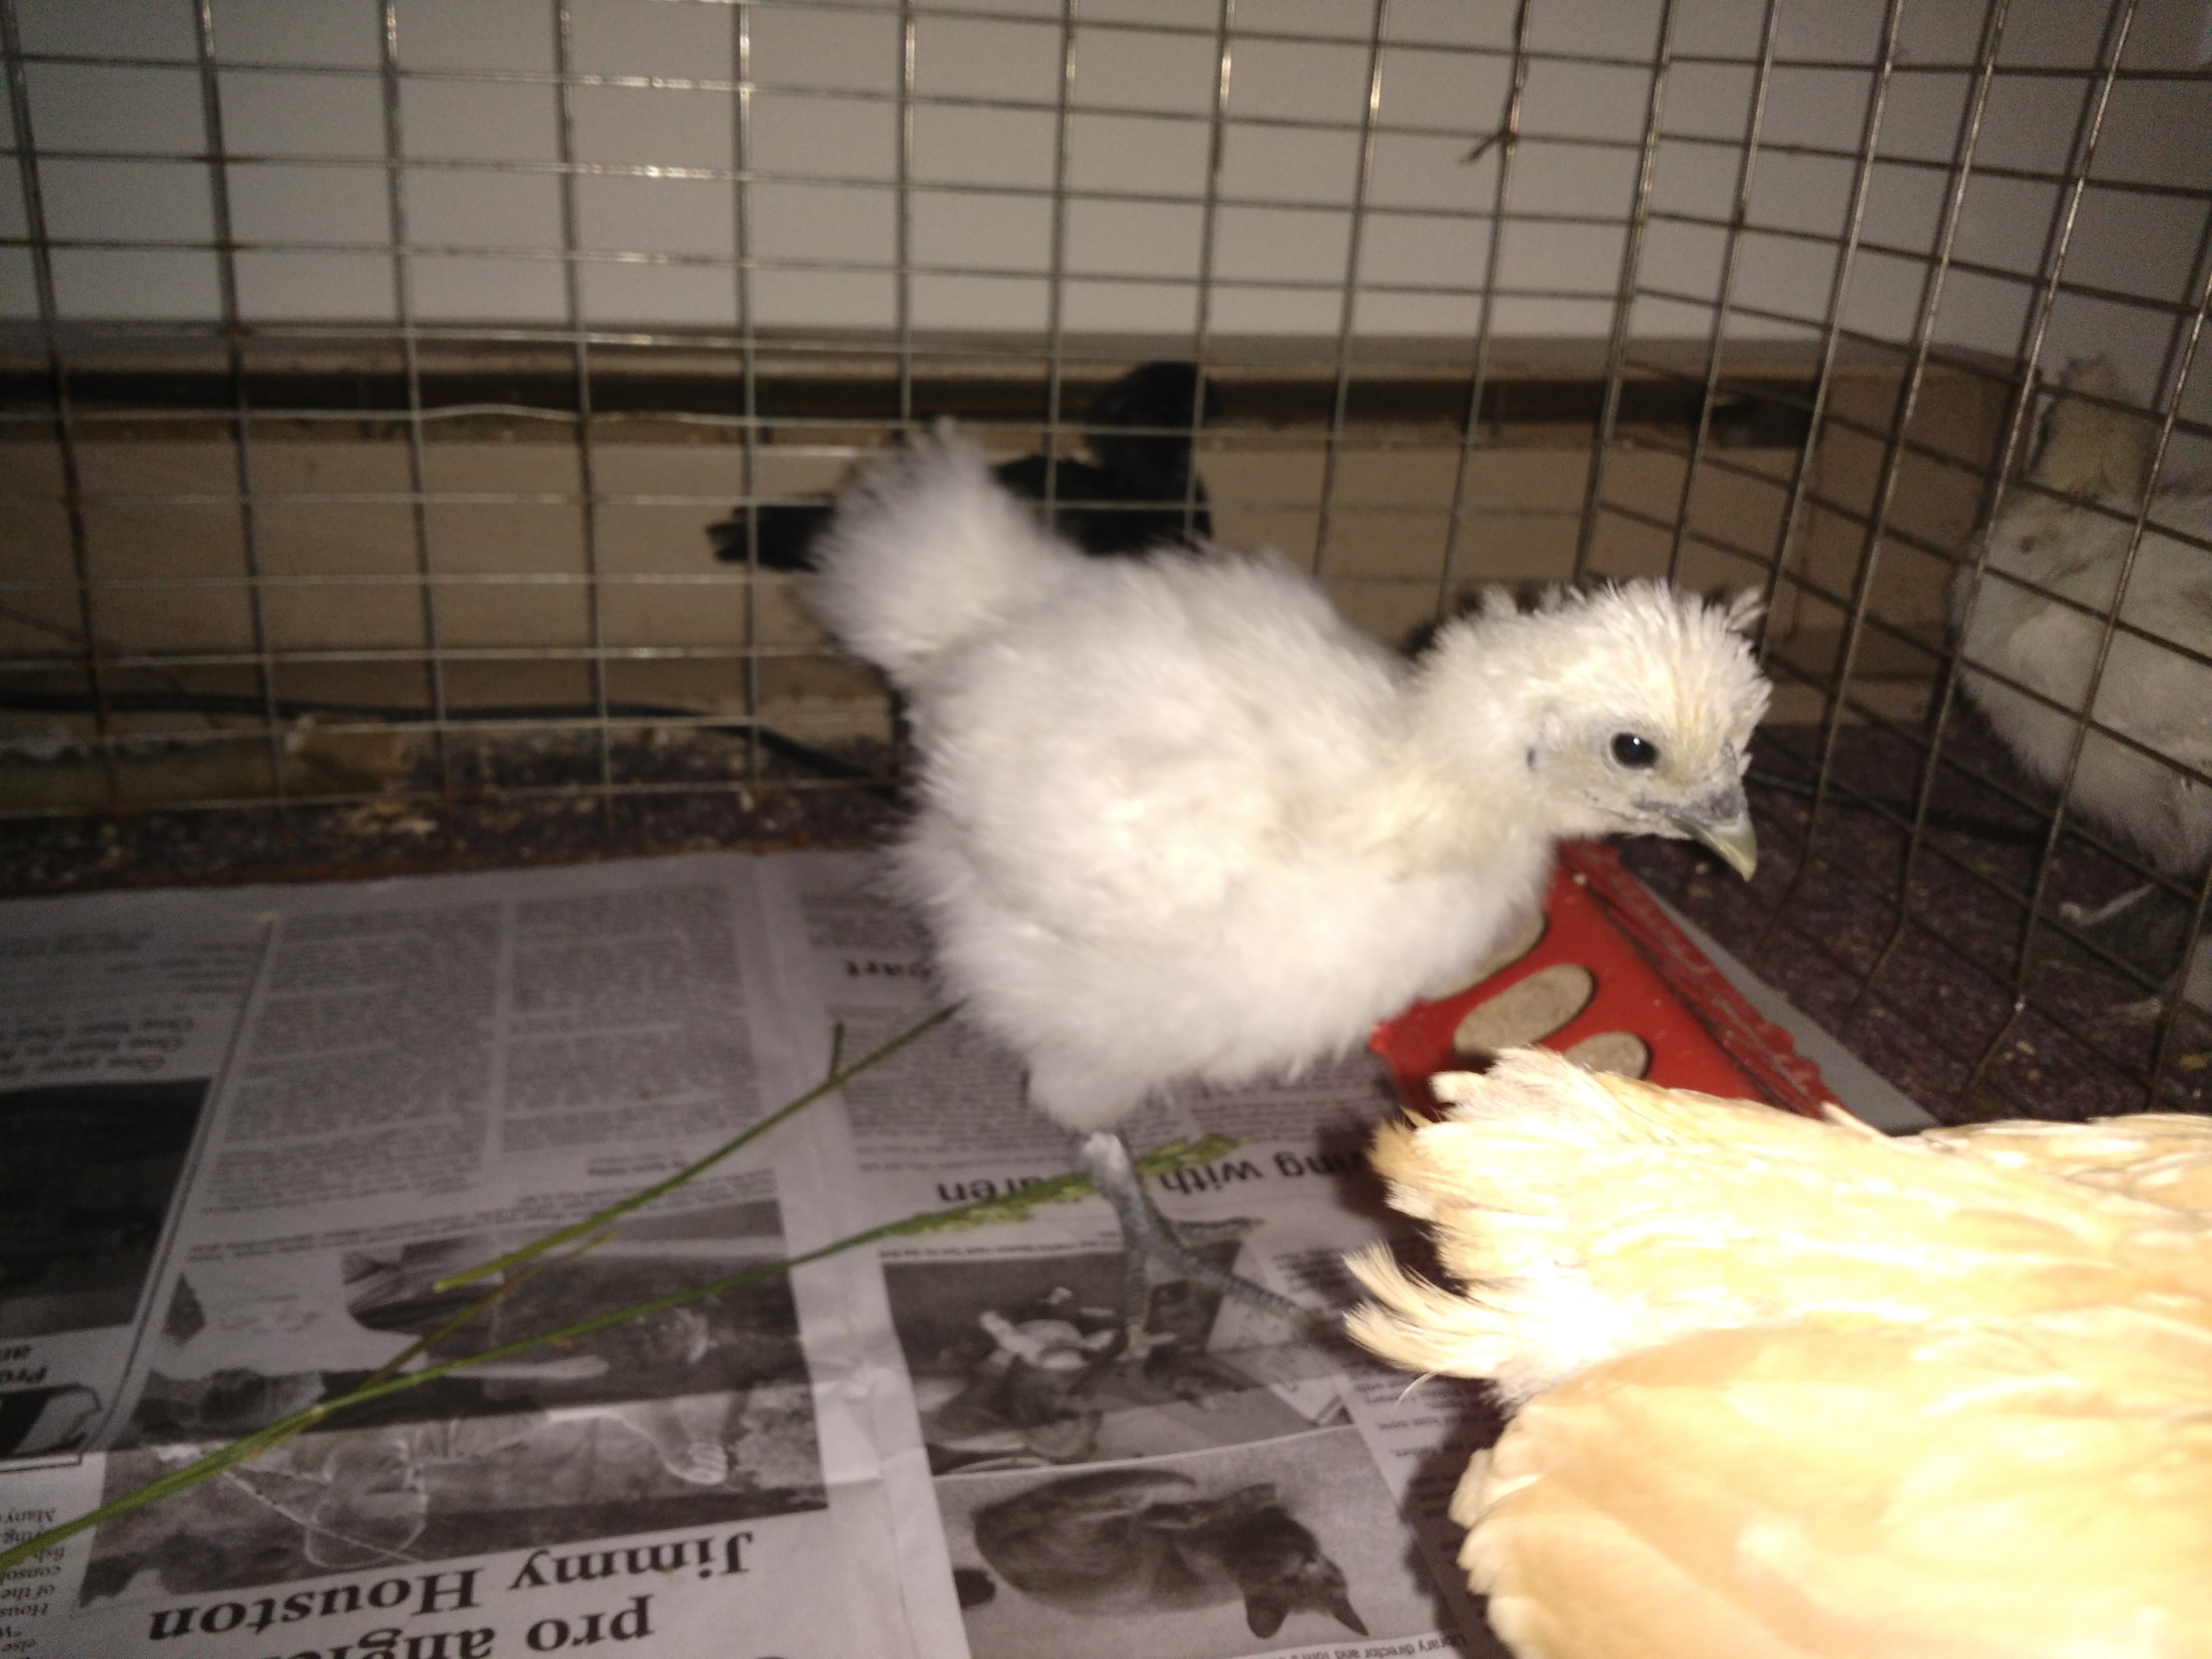 My first time rearing Silkies